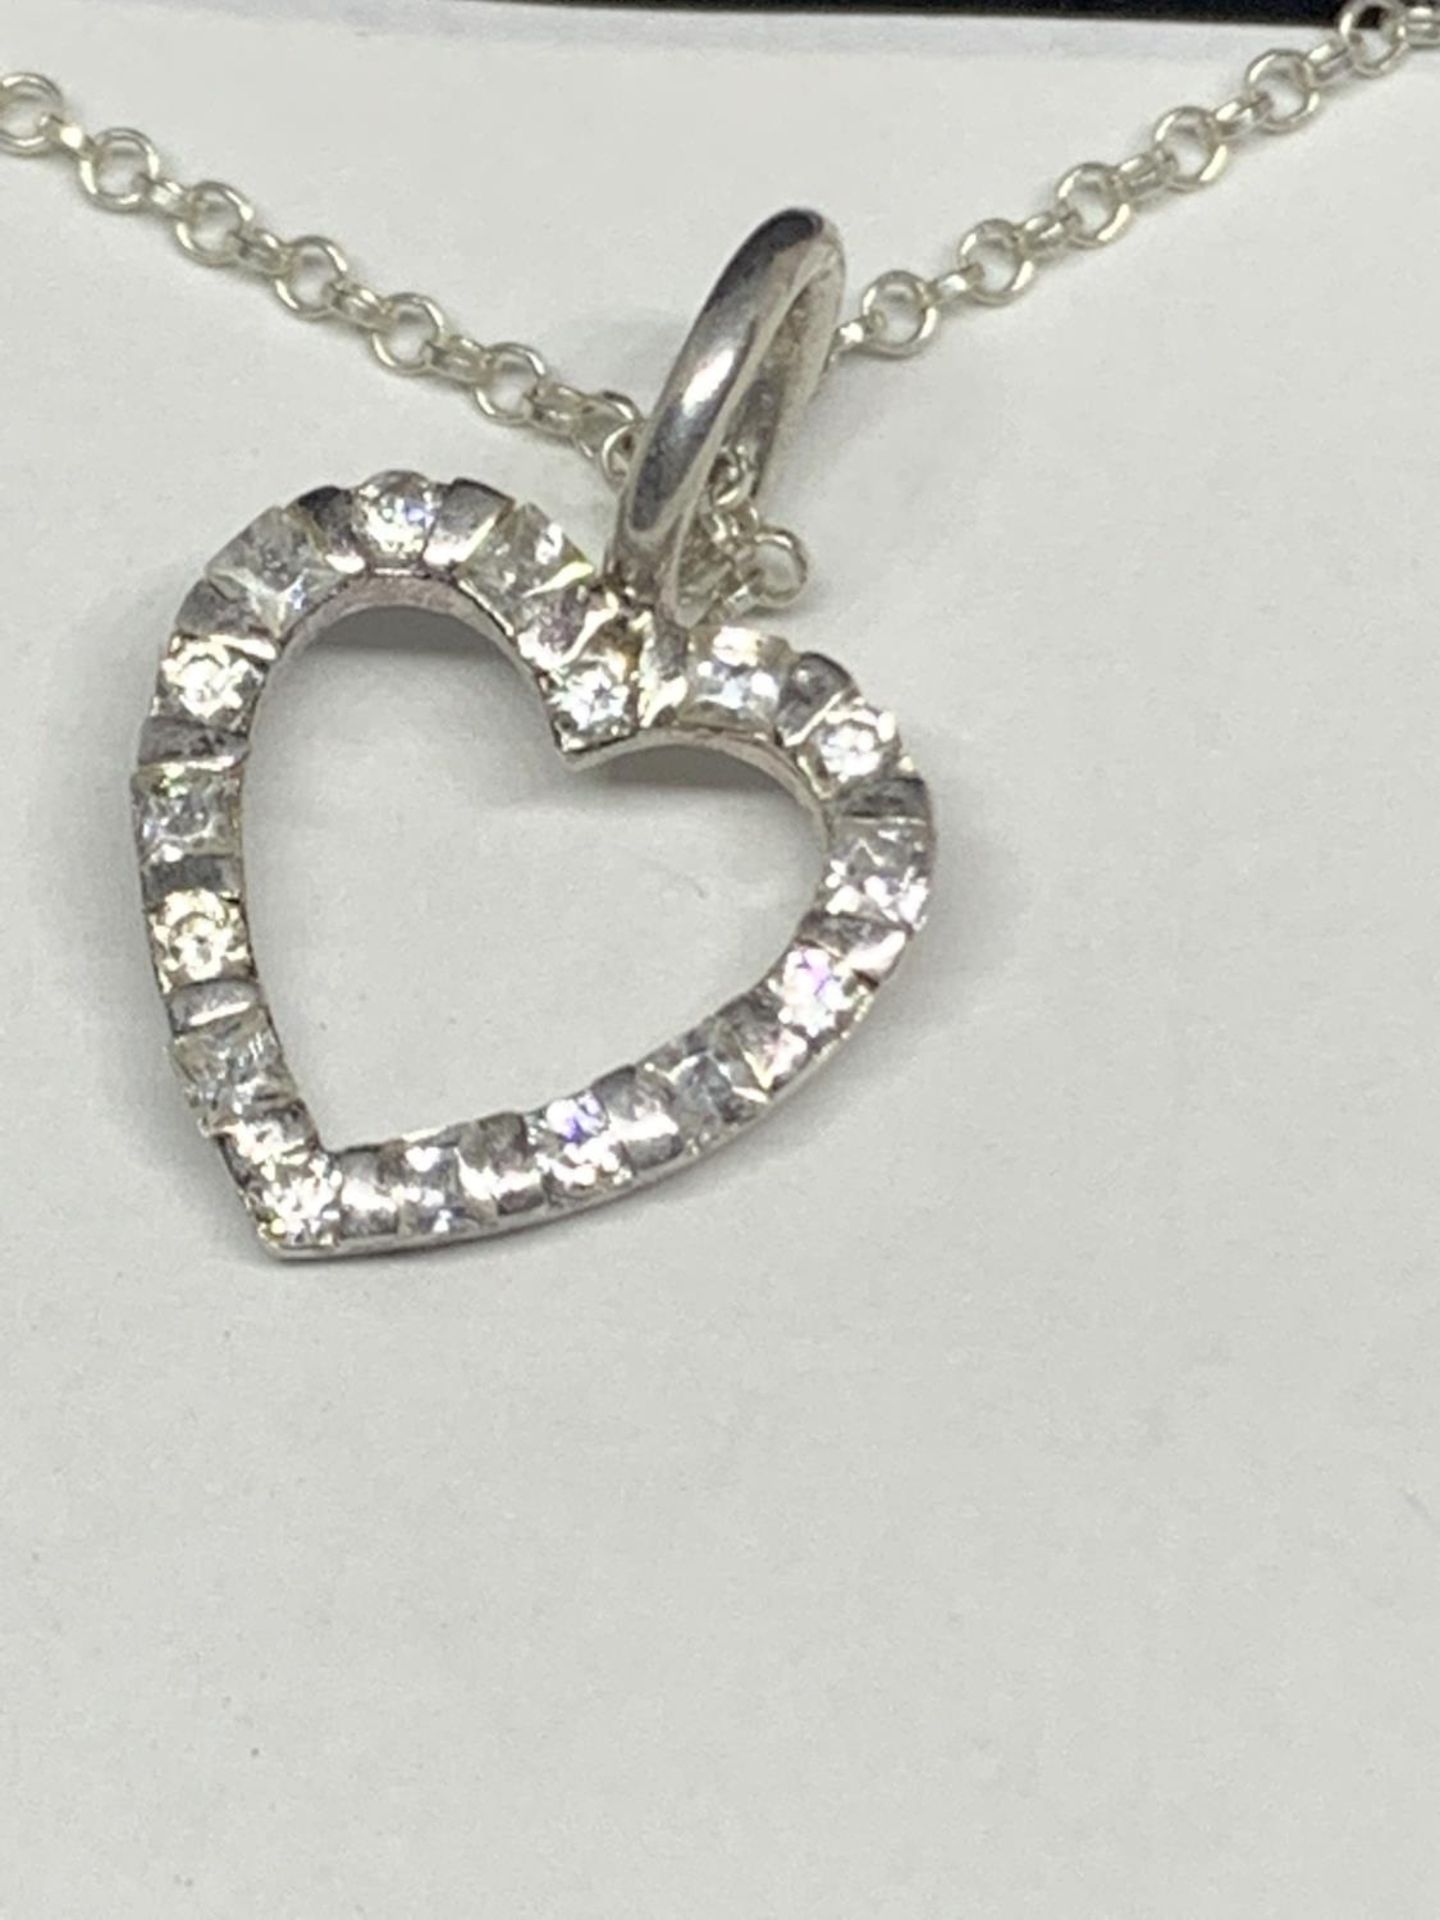 A SILVER BOXED NECKLACE WITH CLEAR STONE HEART PENDANT - Image 2 of 3